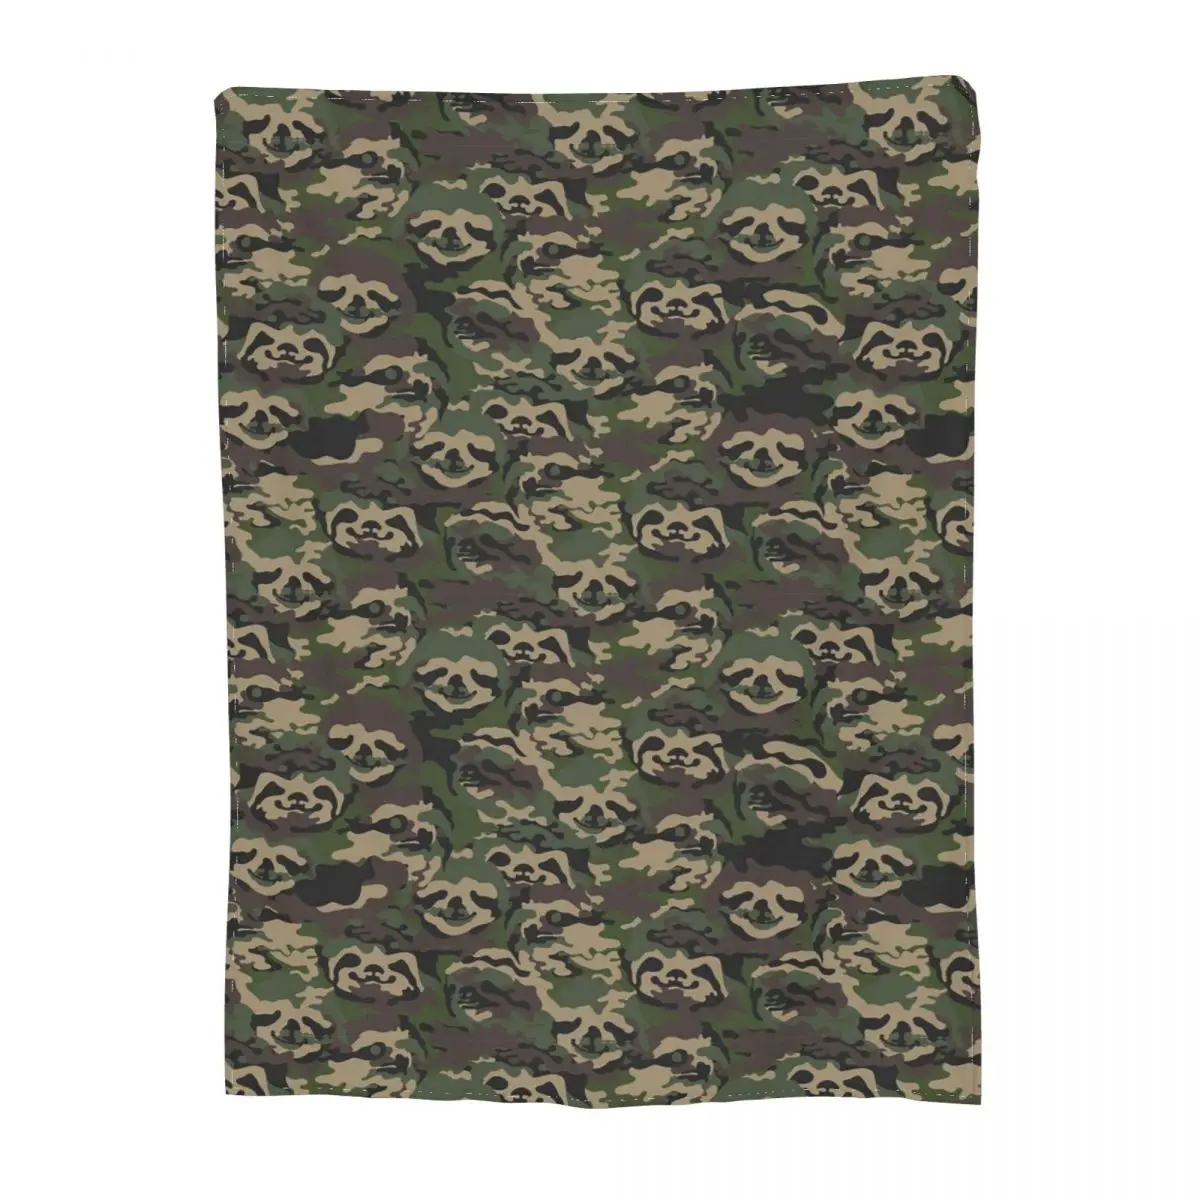 

Relax Sloth Camouflage Blanket Accessories Sofa Decorative Throw Blankets Super Warm Coral Fleece Plush for Outdoor